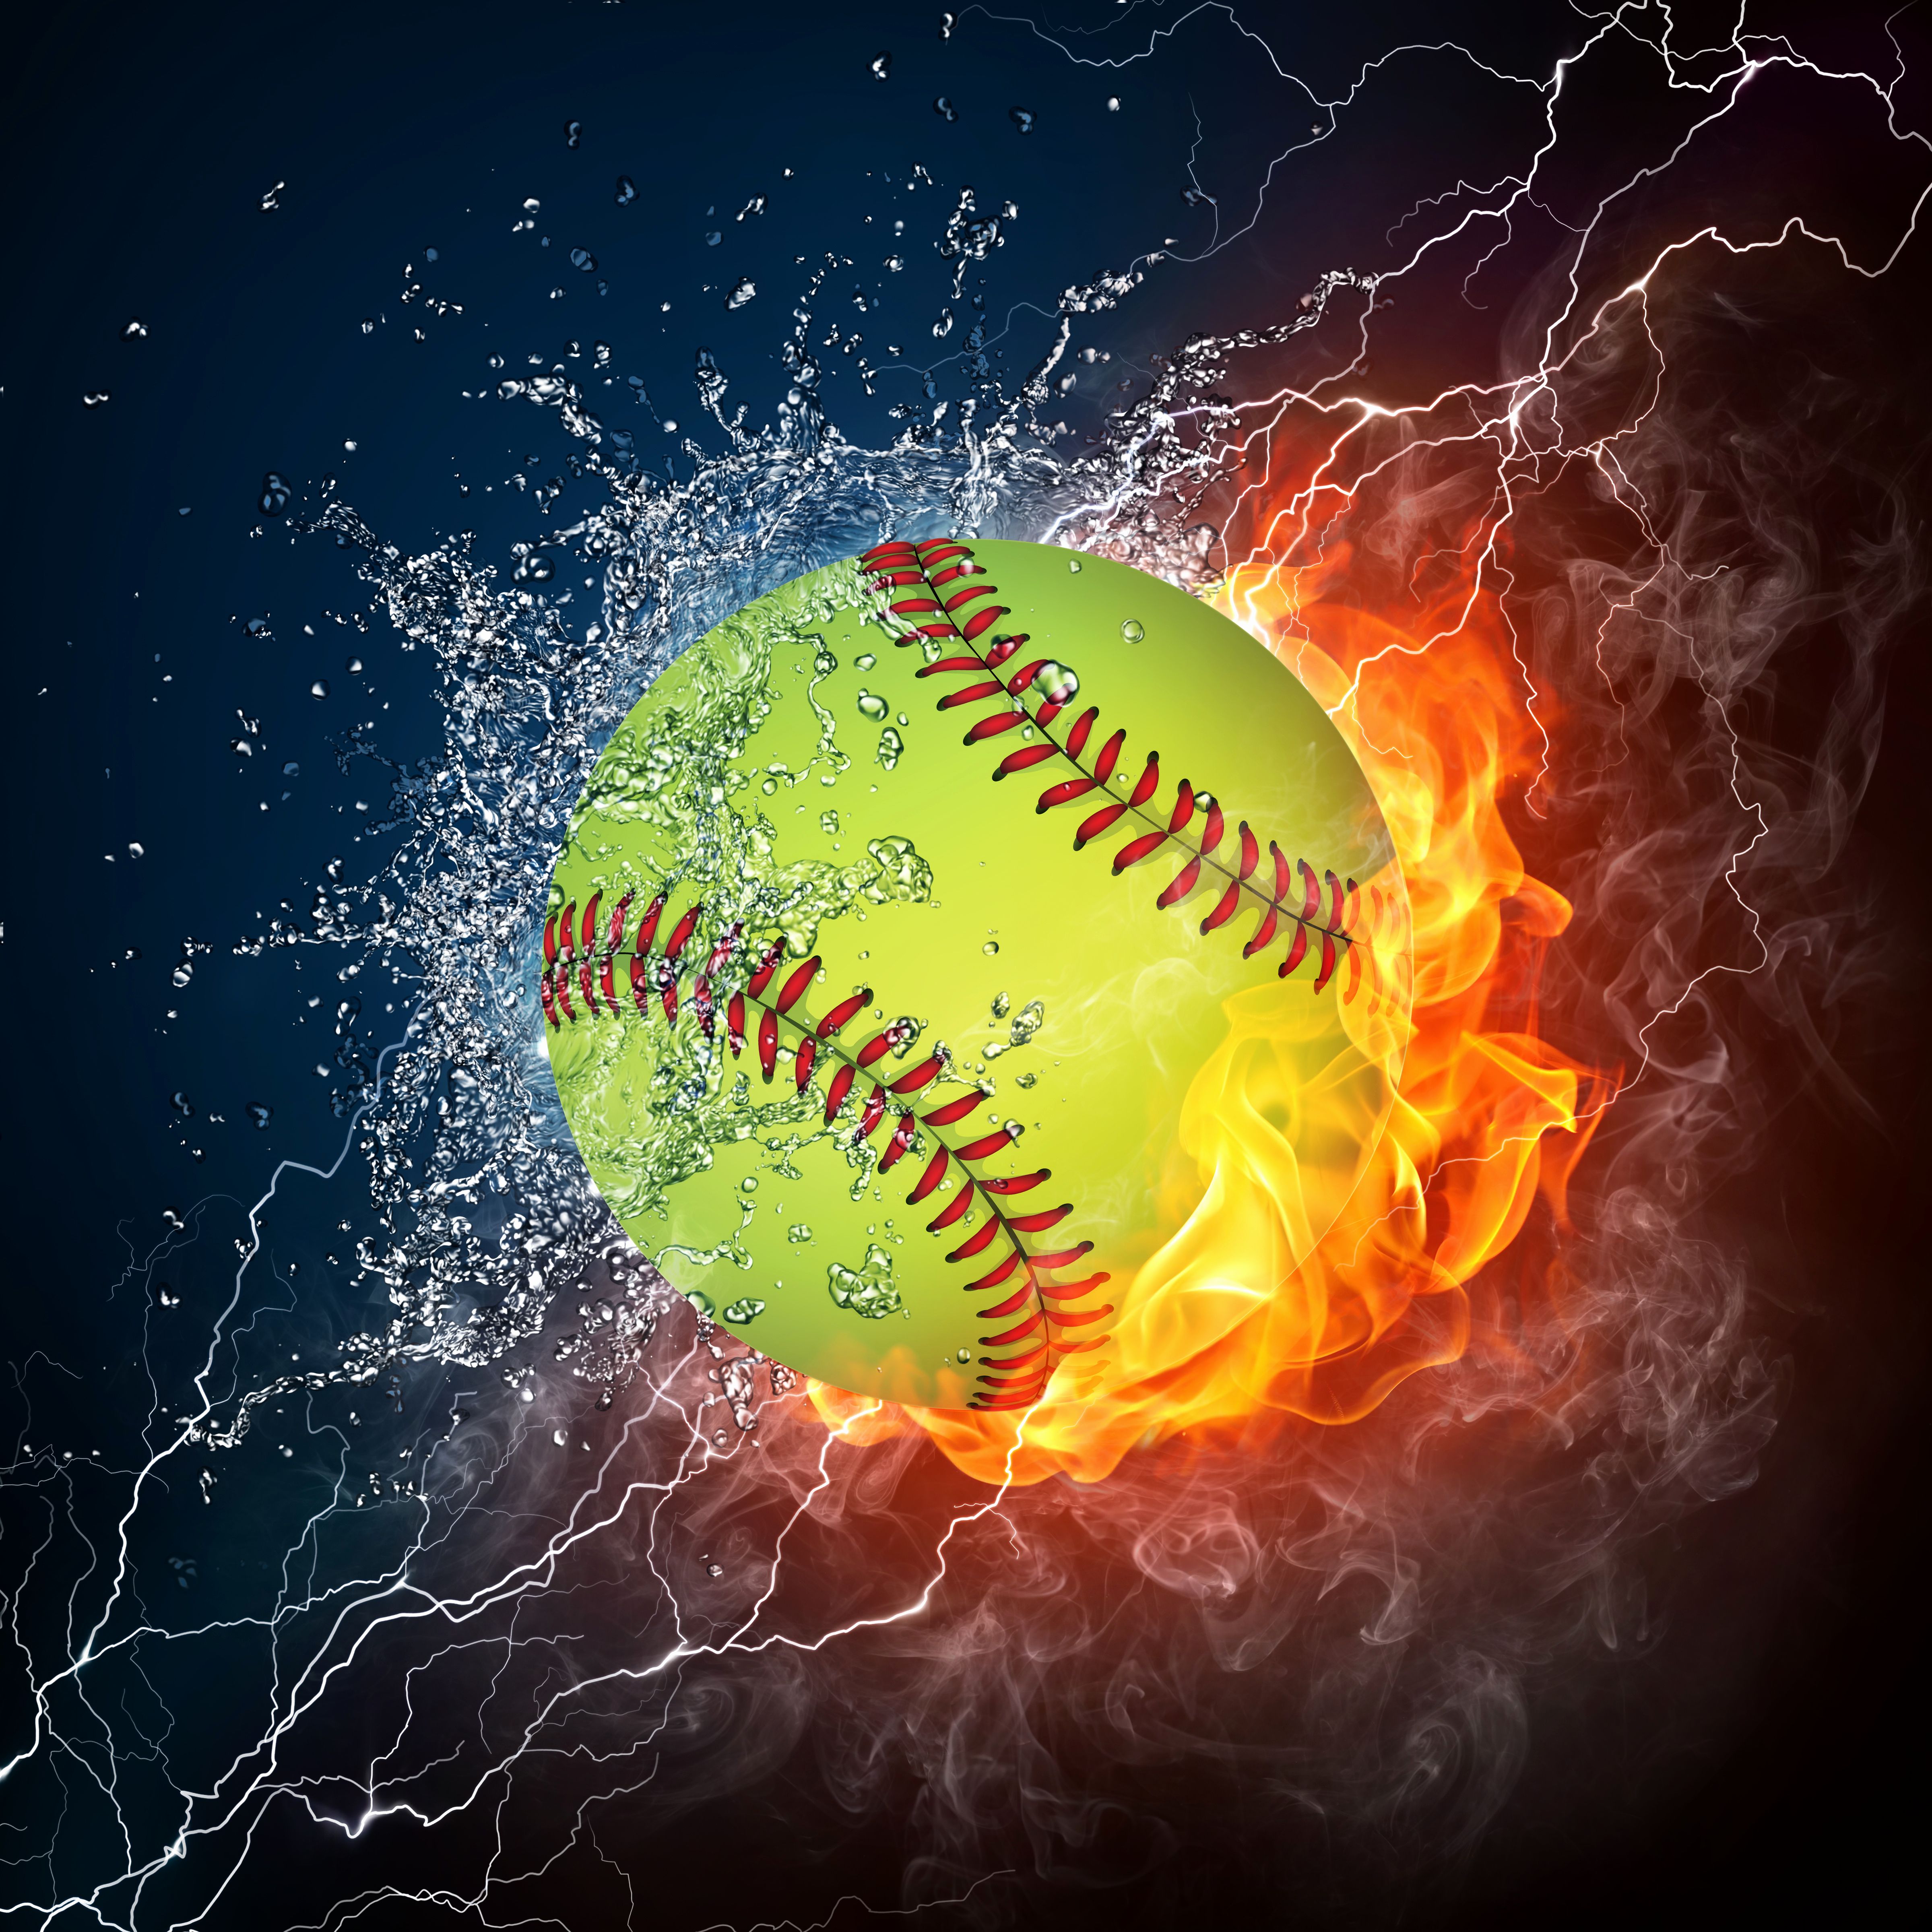 Aesthetic Softball Wallpapers - Wallpaper Cave